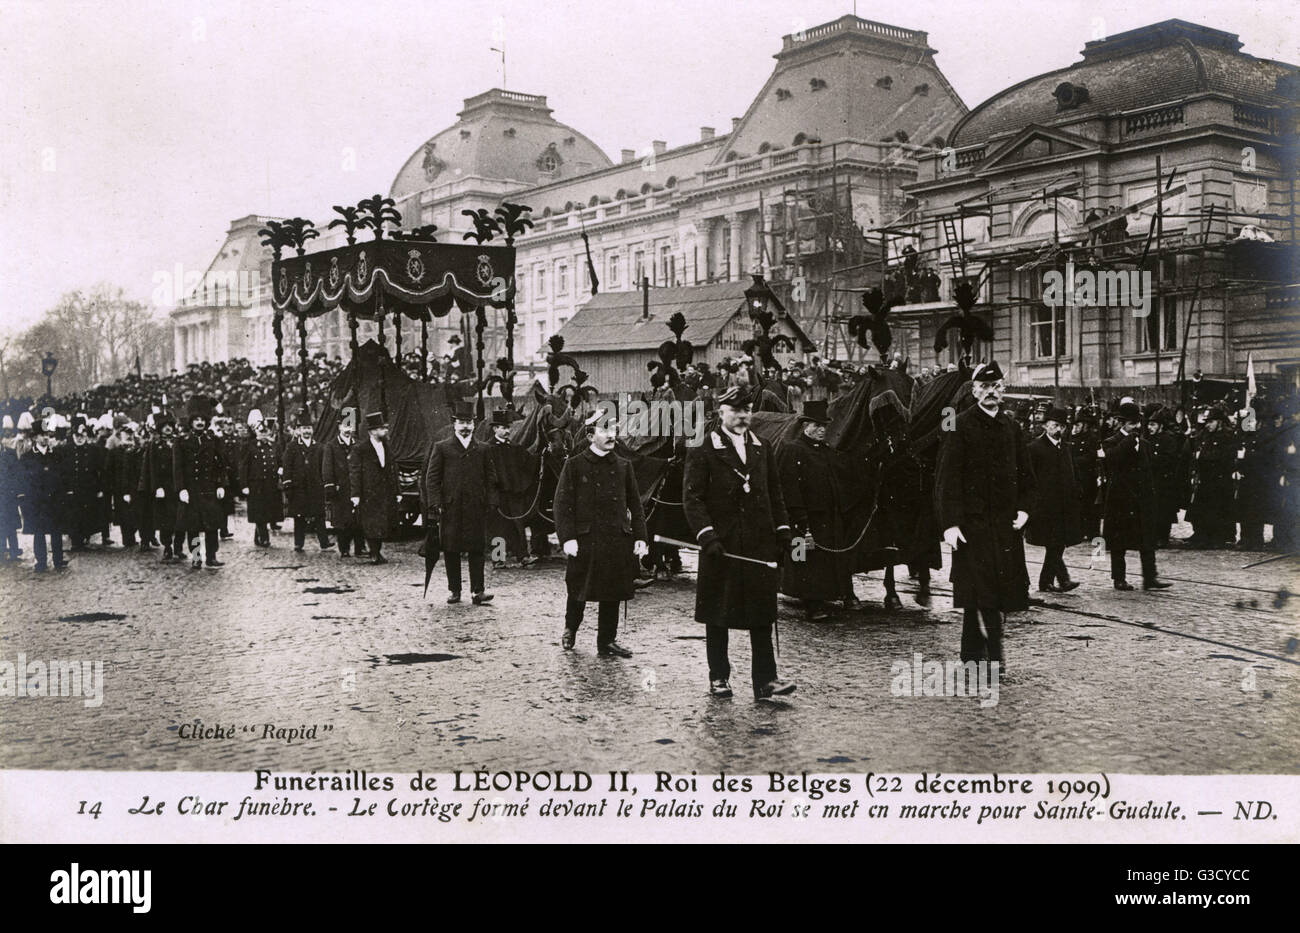 Funeral Cortege of Leopold II, King of Belgium processes slowly through the street of Brussels on 22nd December 1919 - here it is passing the Royal Palace.     Date: 1909 Stock Photo